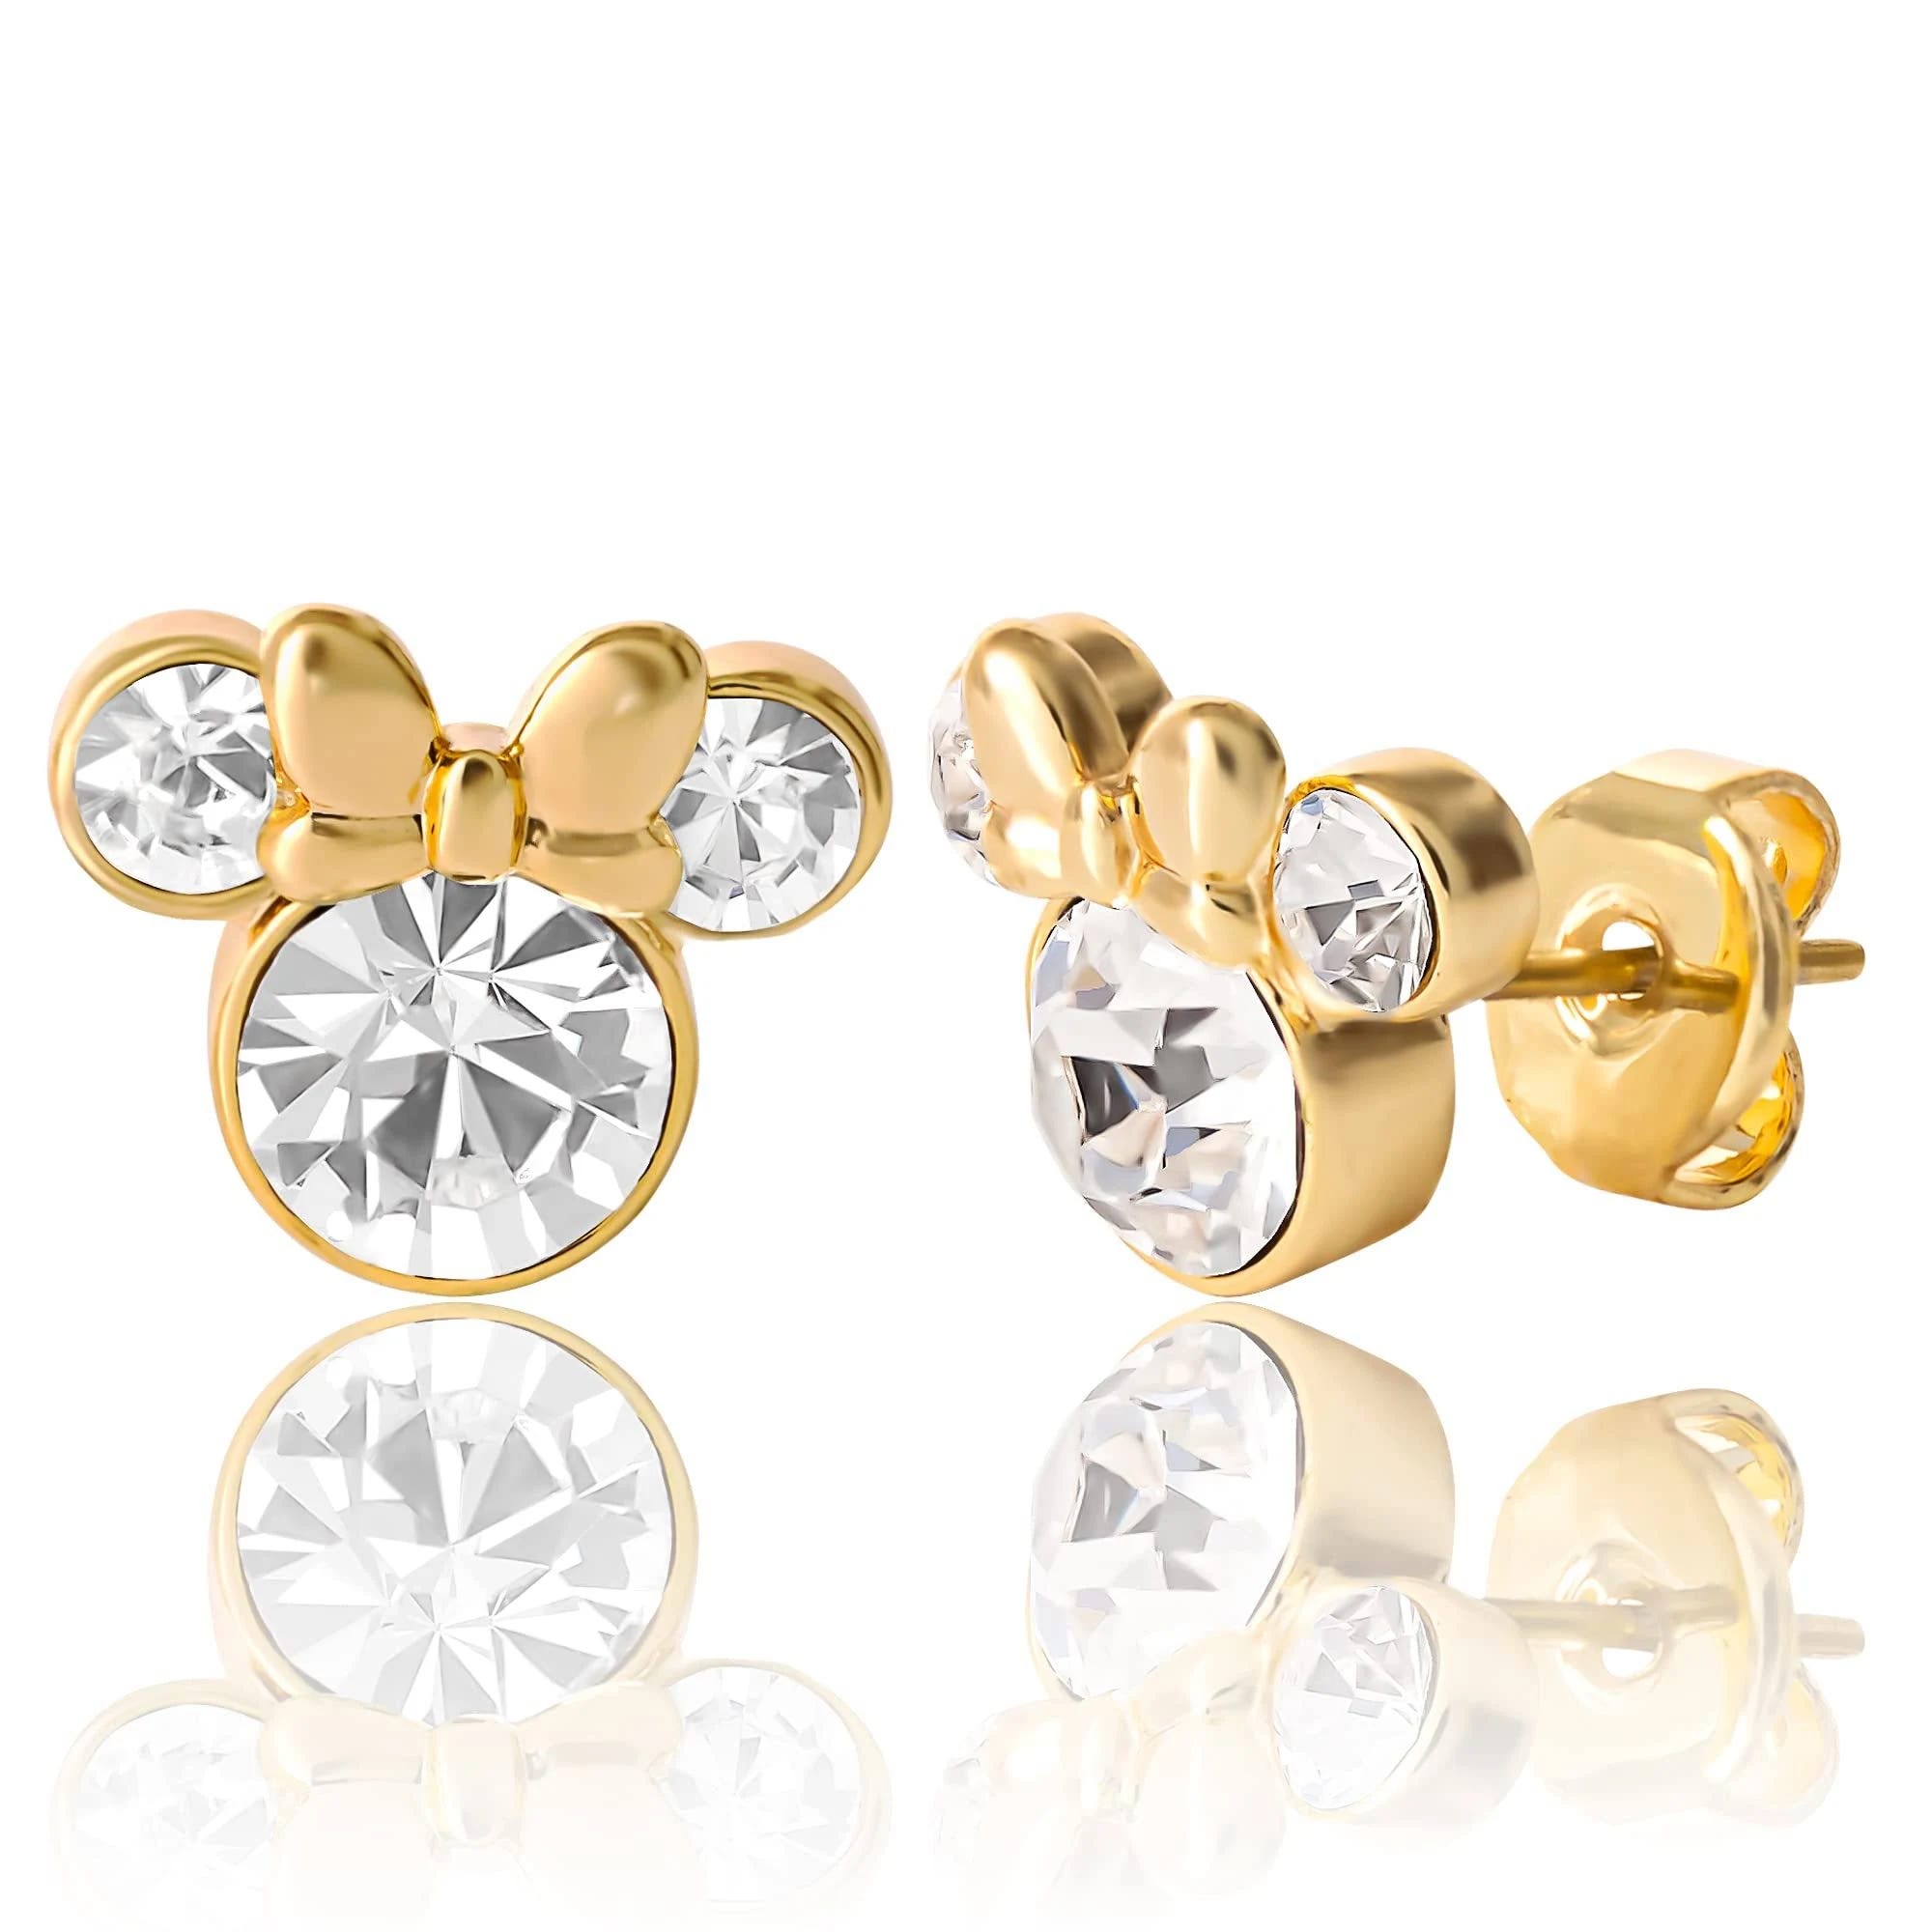 Officially Licensed Minnie Mouse Crystal Stud Earrings | Image